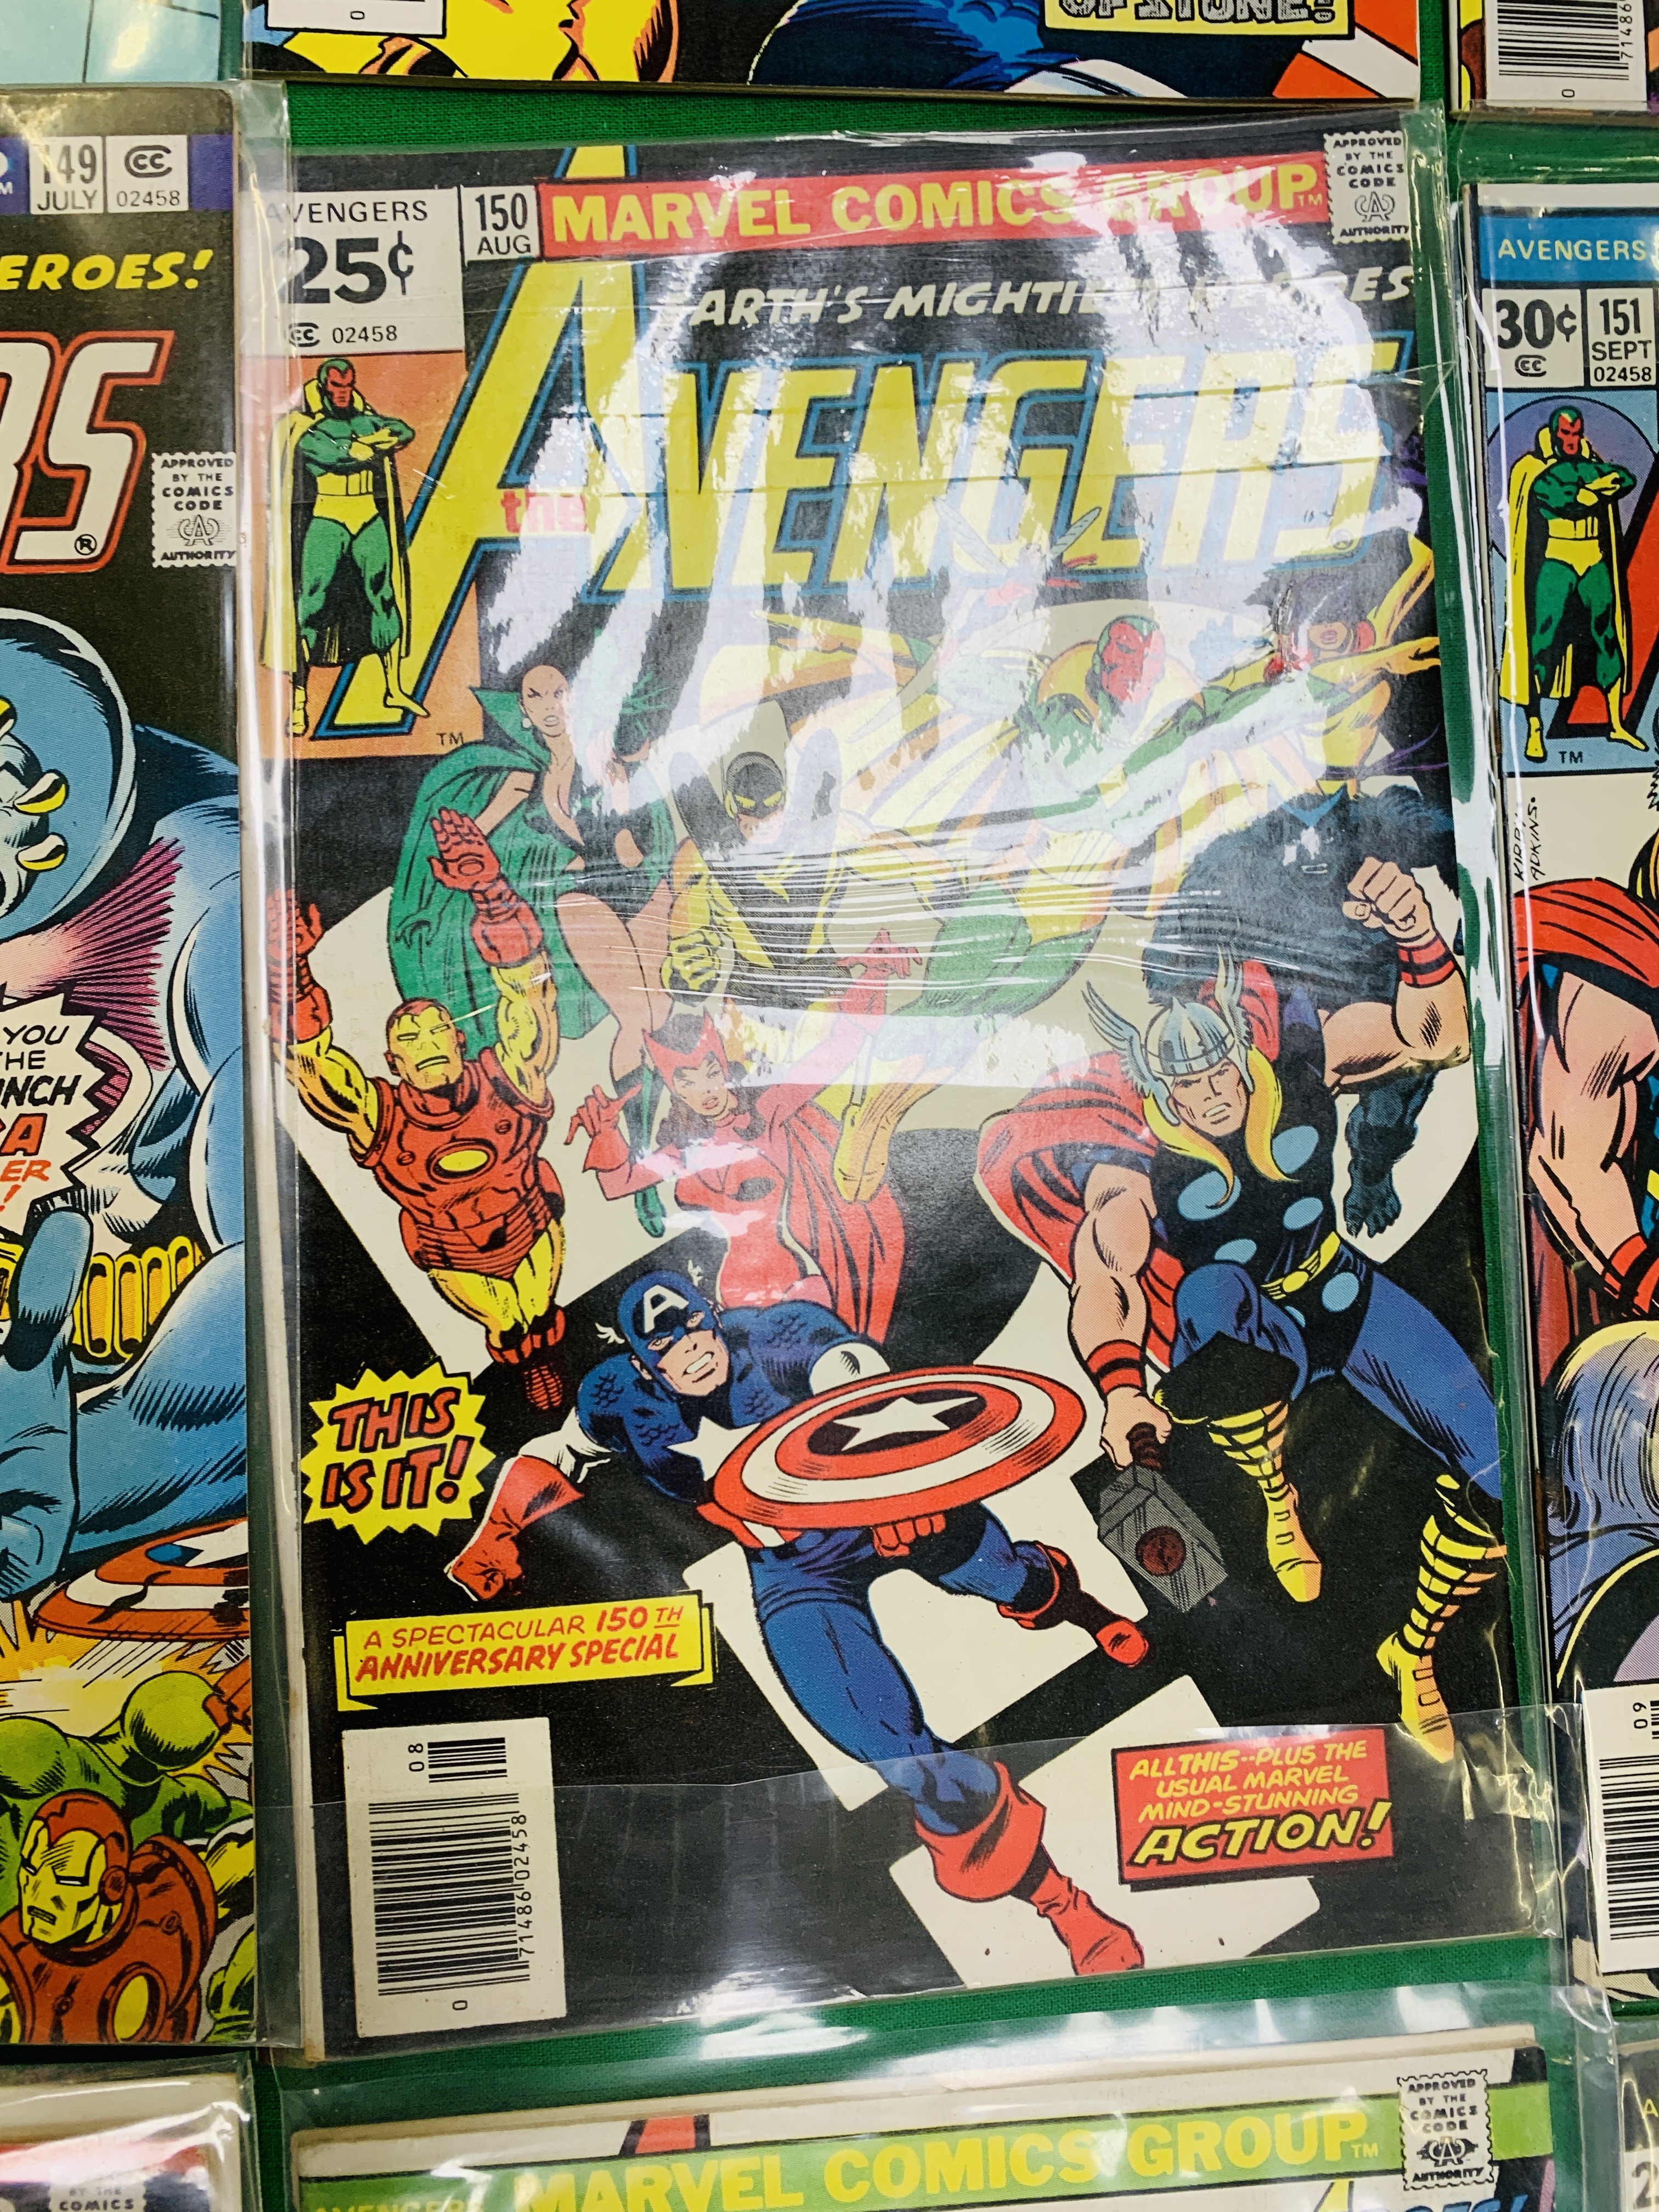 MARVEL COMICS THE AVENGERS NO. 101 - 299, MISSING ISSUES 103 AND 110. - Image 36 of 130